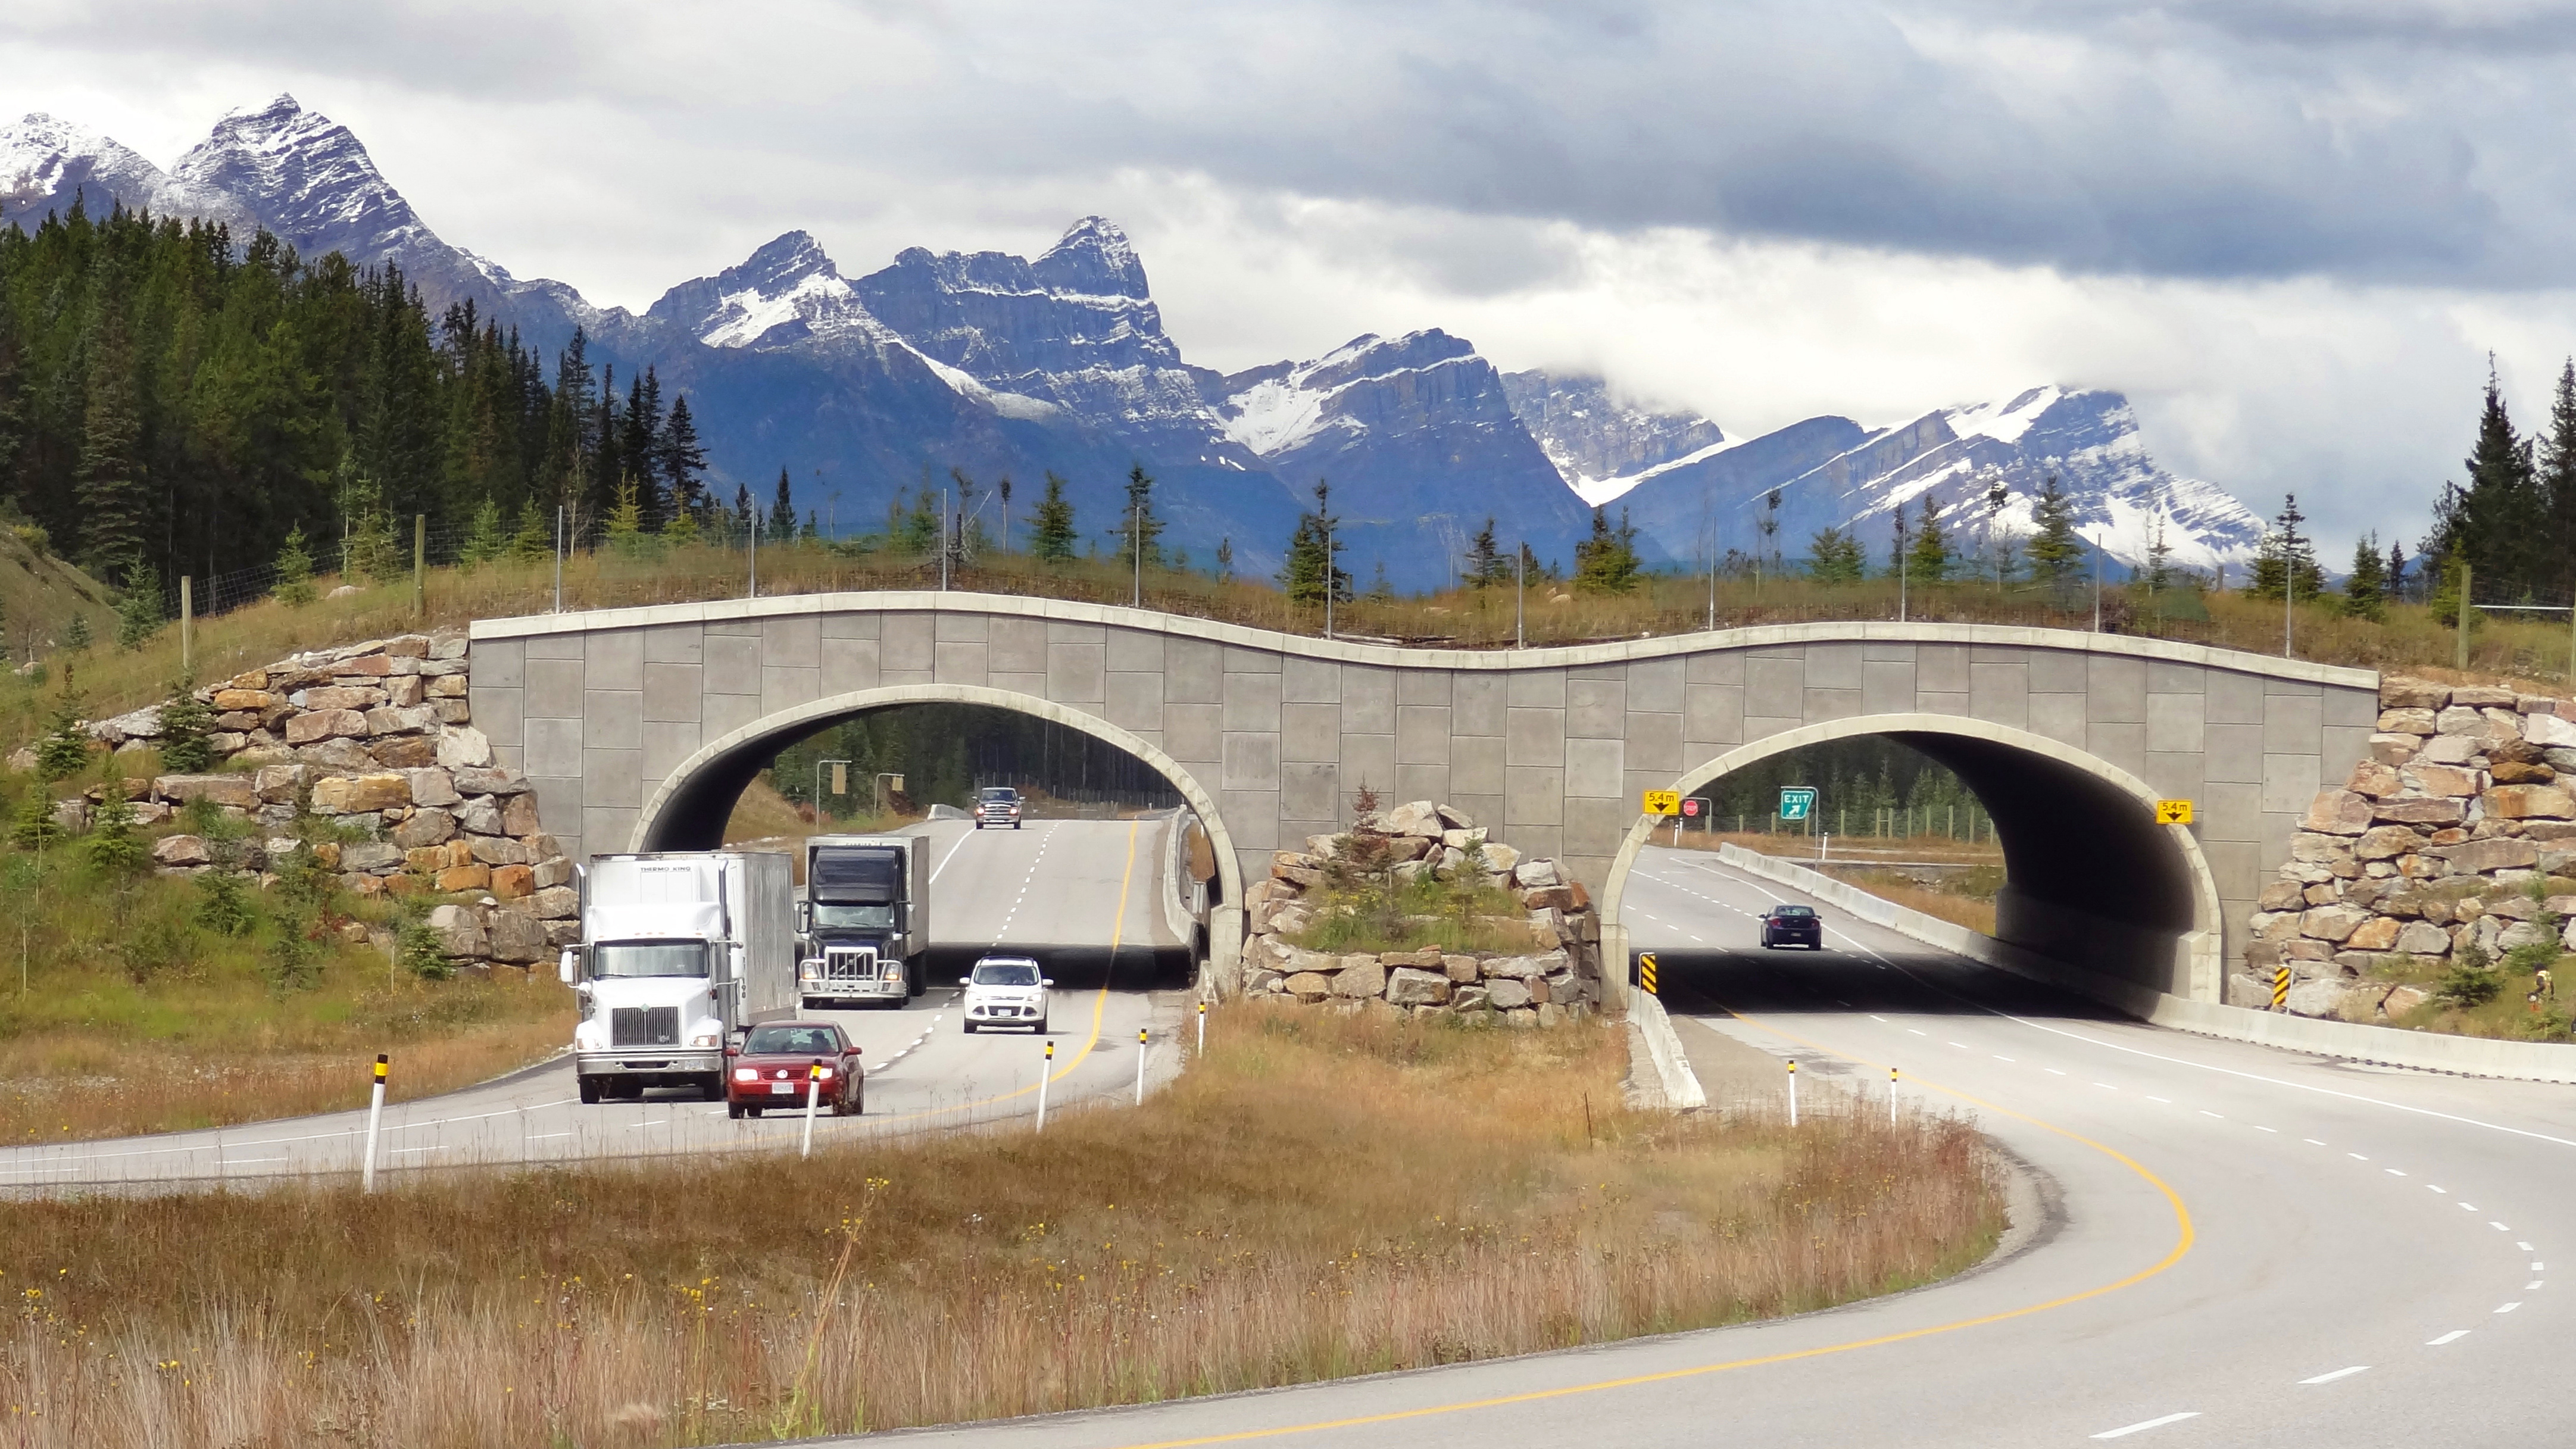 Vehicles pass under a wildlife corridor with small trees and other vegetation on it. Thick conifer forest and mountains are visible in the background.